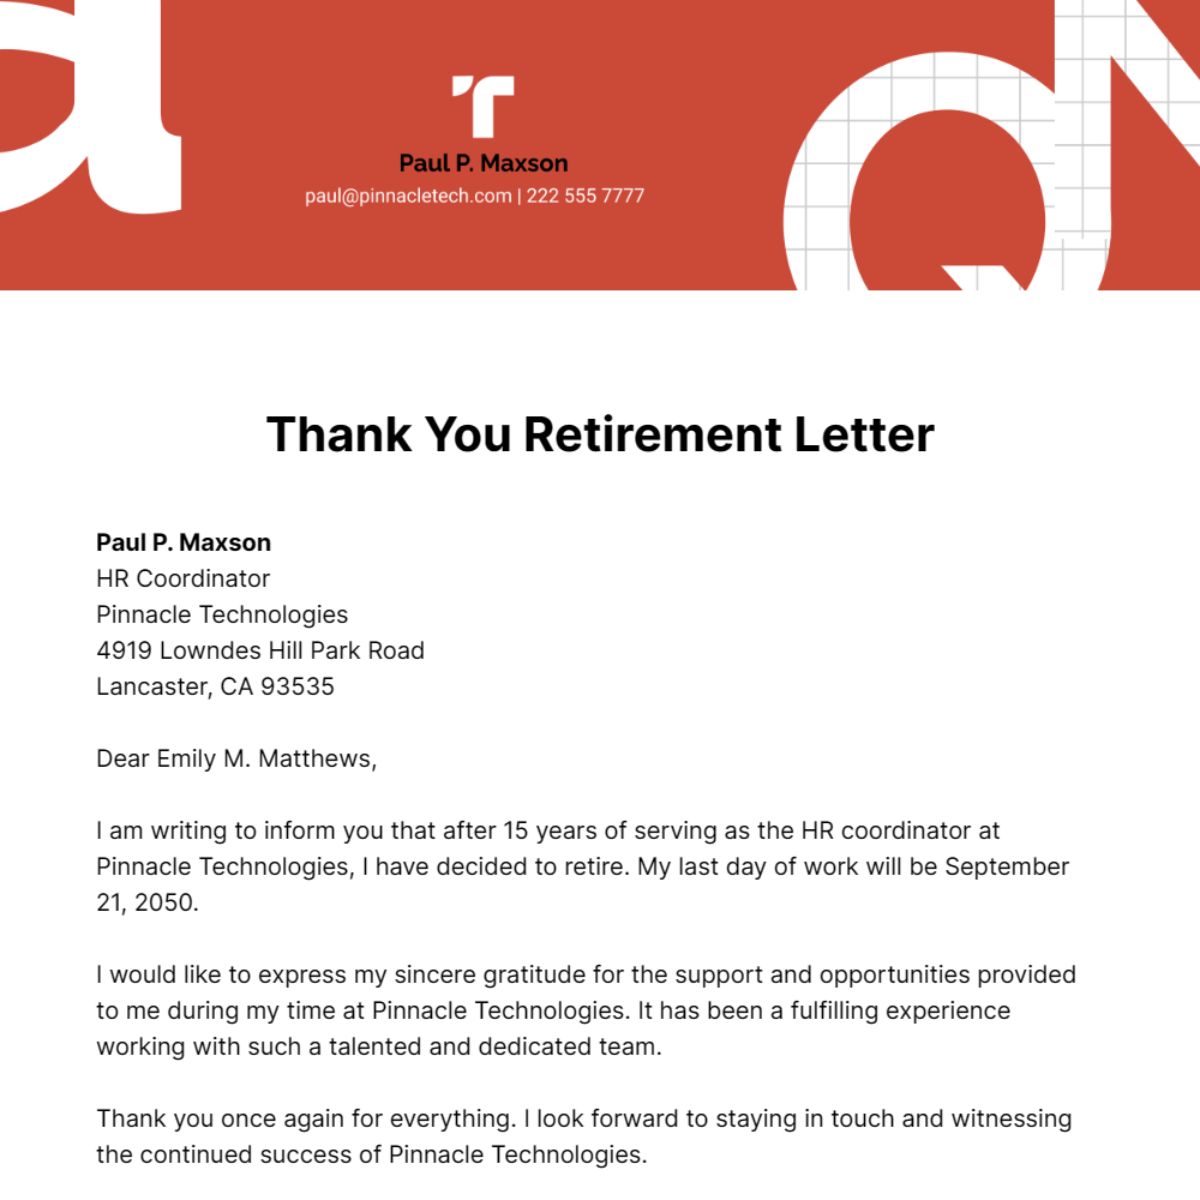 Thank you Retirement Letter Template